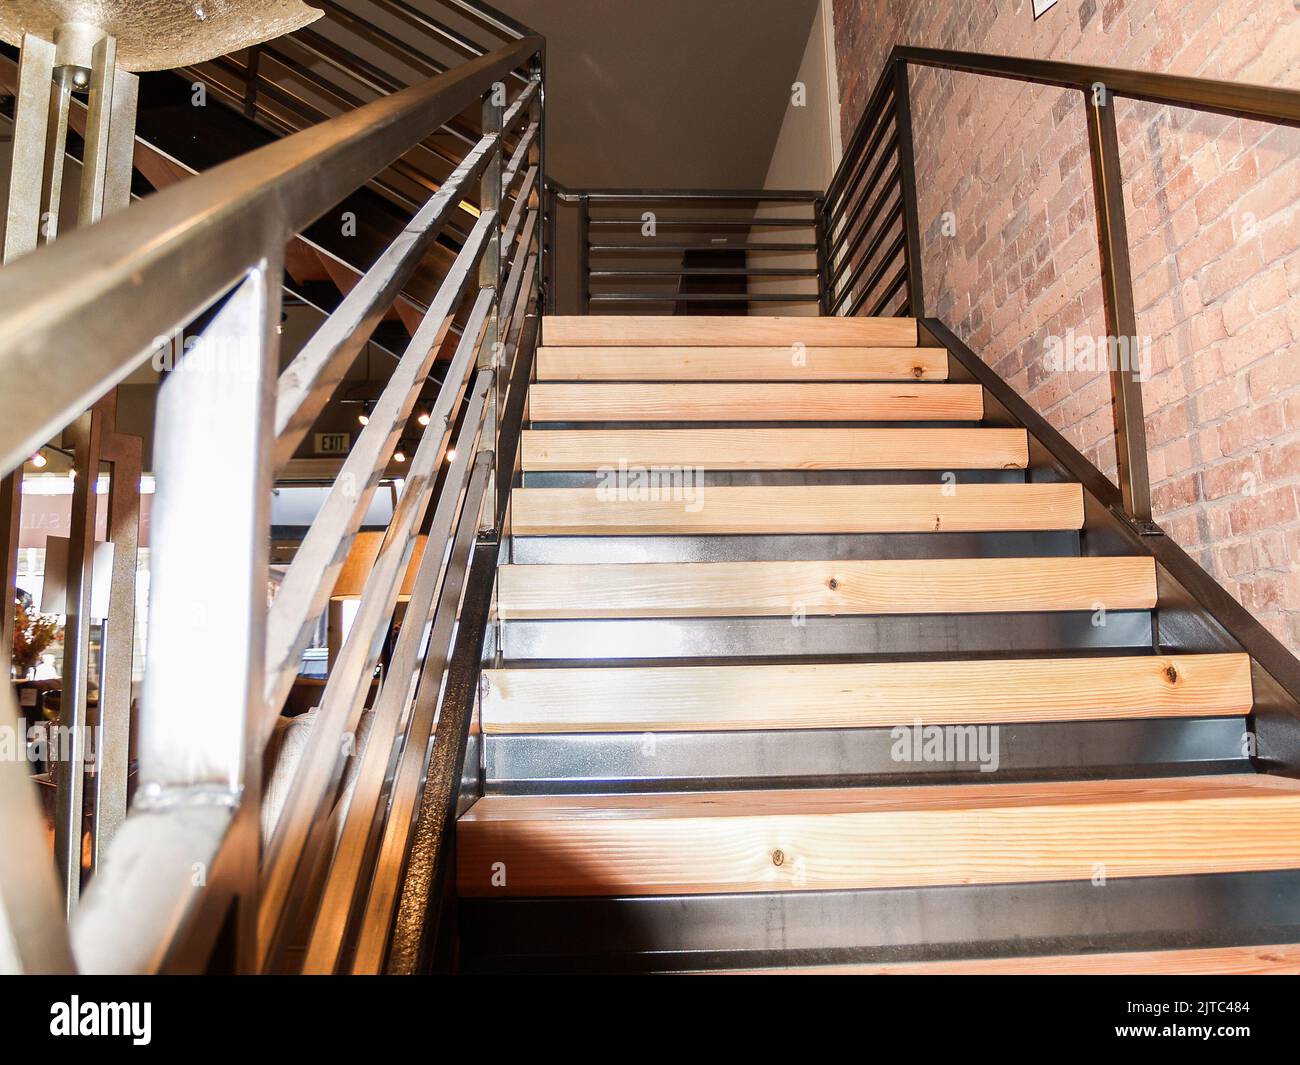 Steel staircase frame with wooden risers and steps leading to landing with handrails. Stock Photo